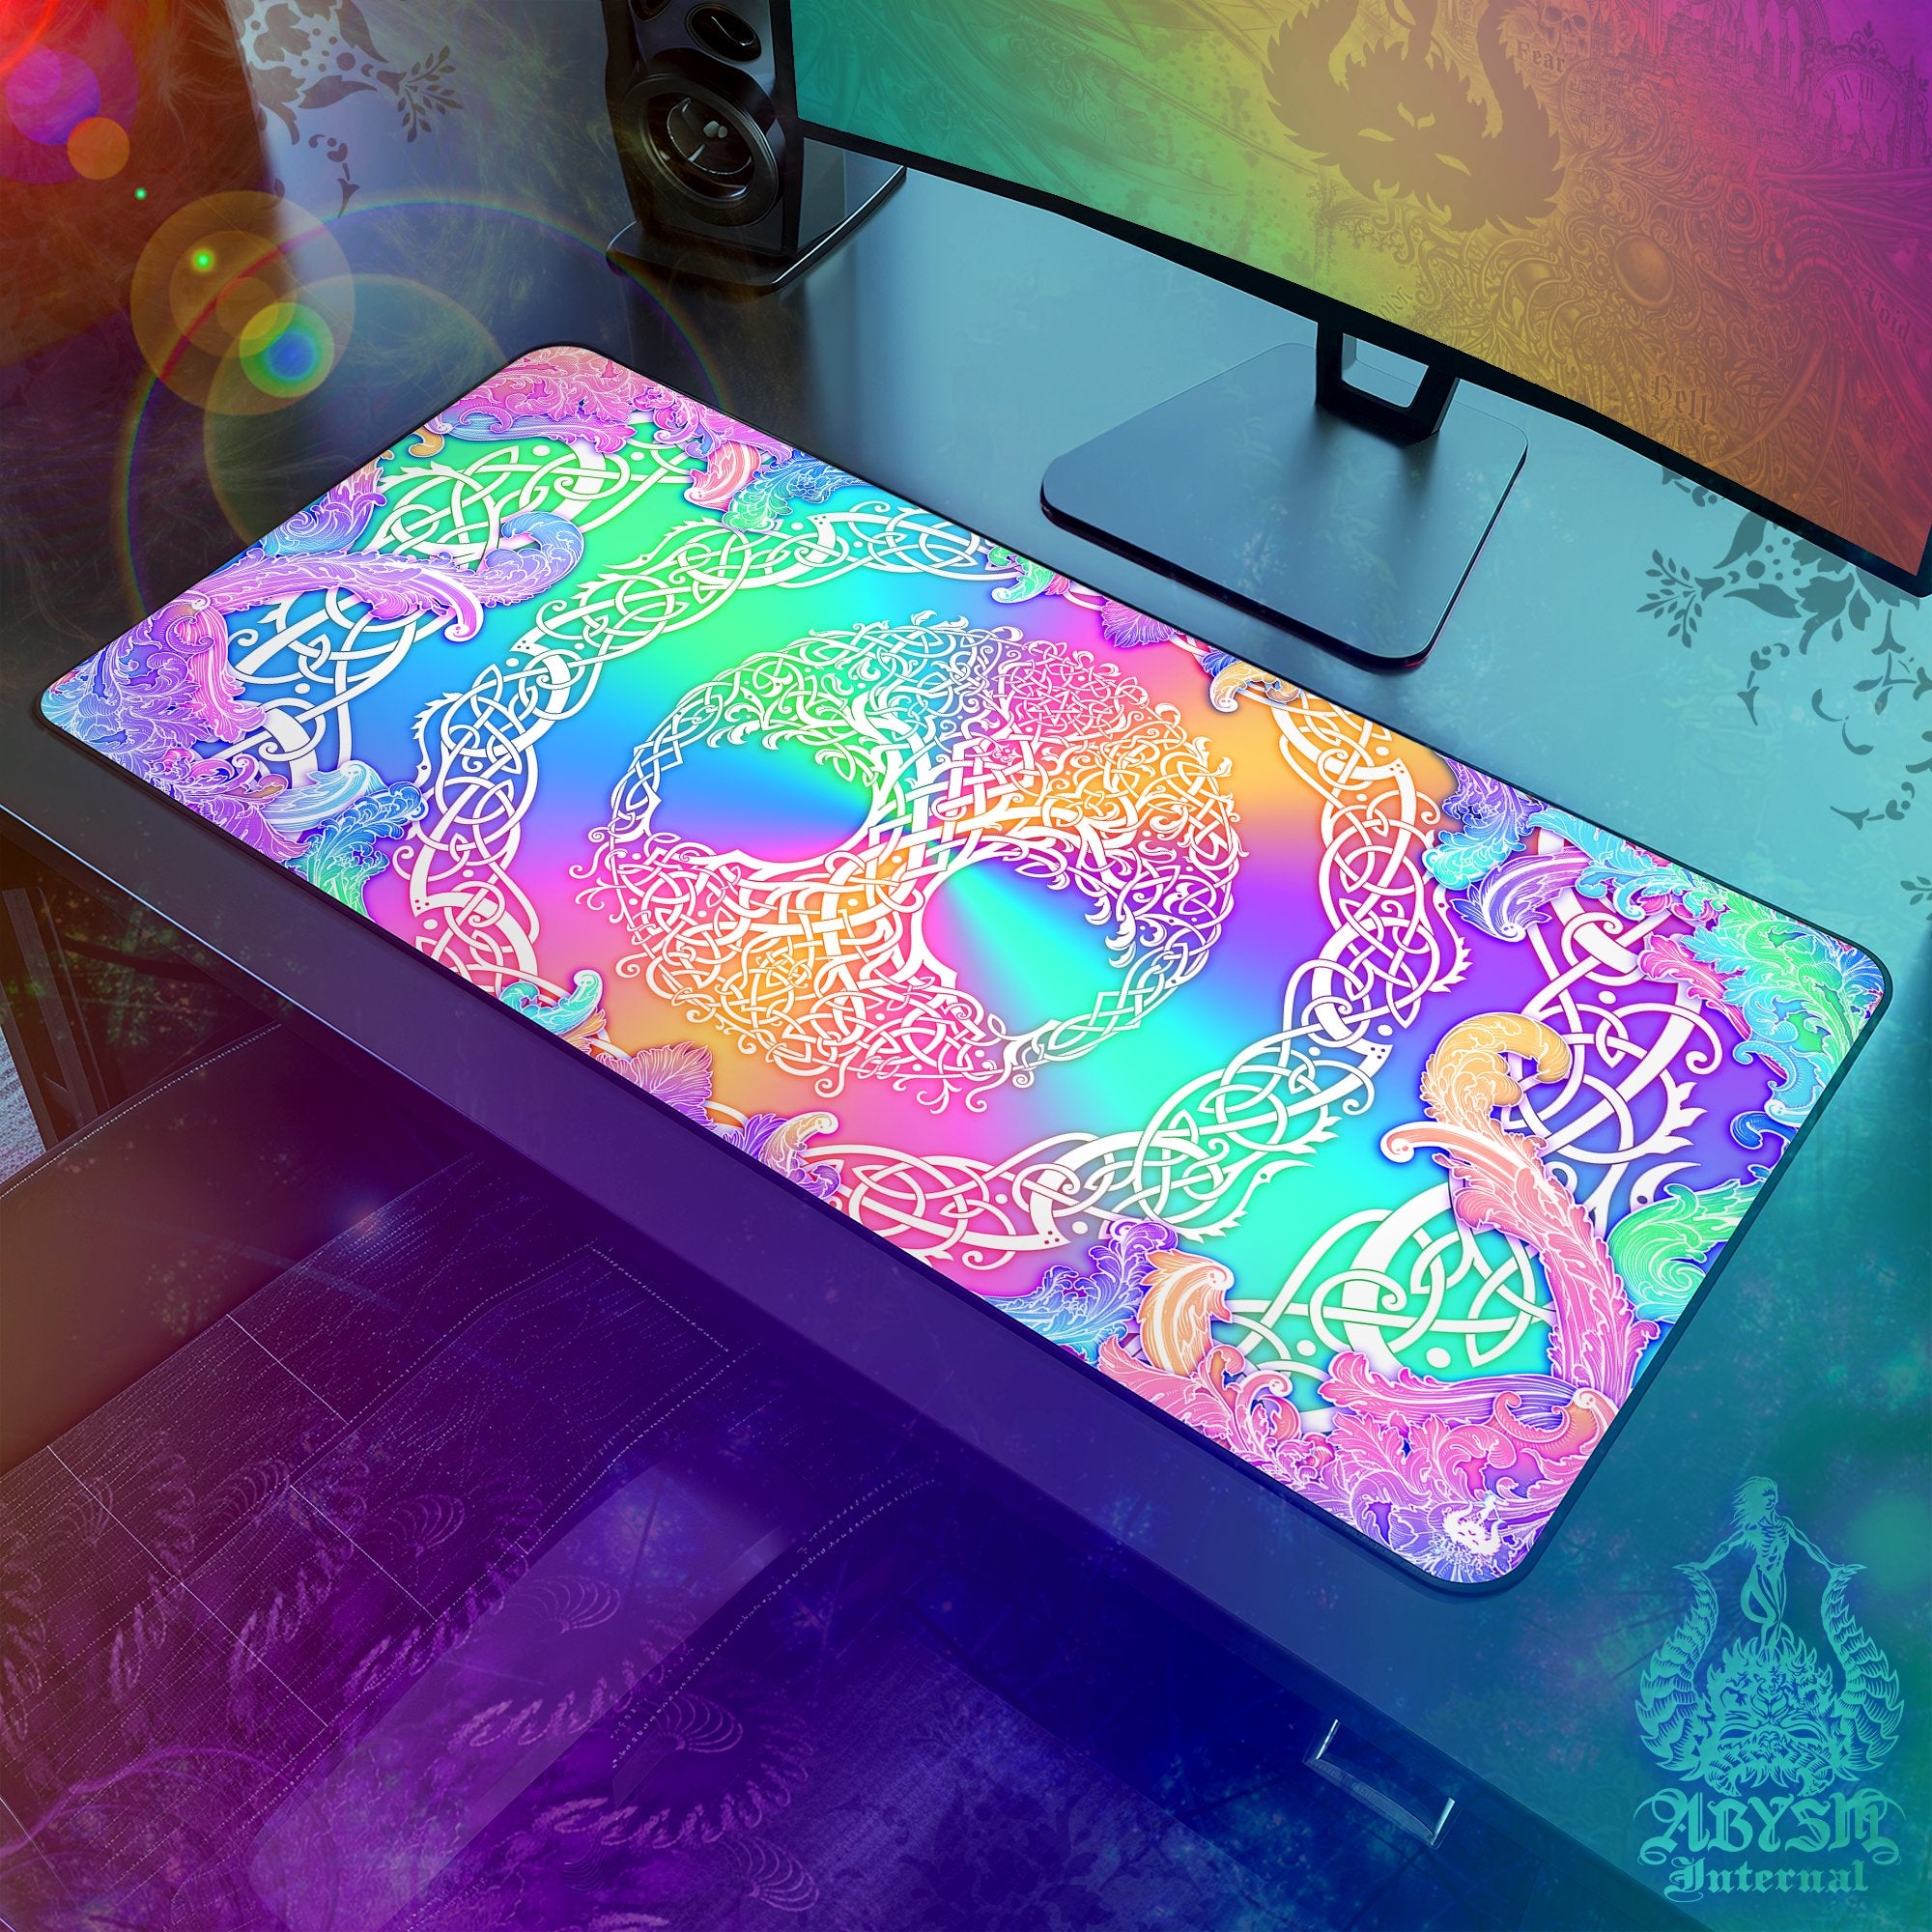 Colorful Gaming Desk Mat, Celtic Knotwork Mouse Pad, Girl Gamer, Tree of Life Table Protector Cover, Witchy Pastel Workpad, Wicca Art Print - Abysm Internal